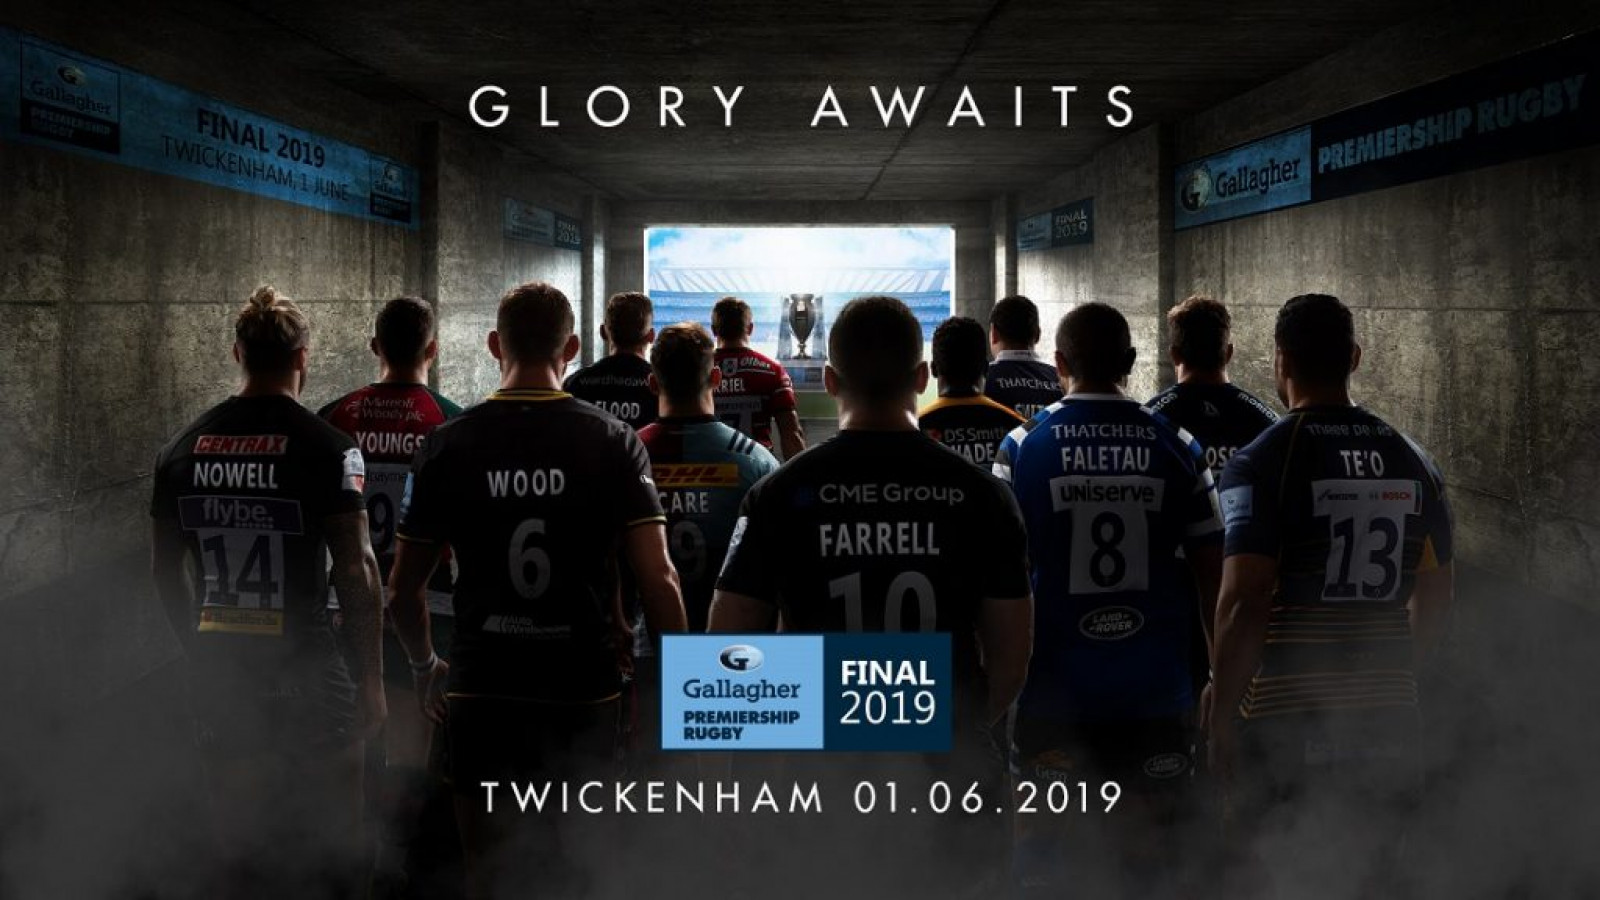 **PRIZE DRAW ** 4x Tickets to the Premiership Rugby Finals at Twickenham!